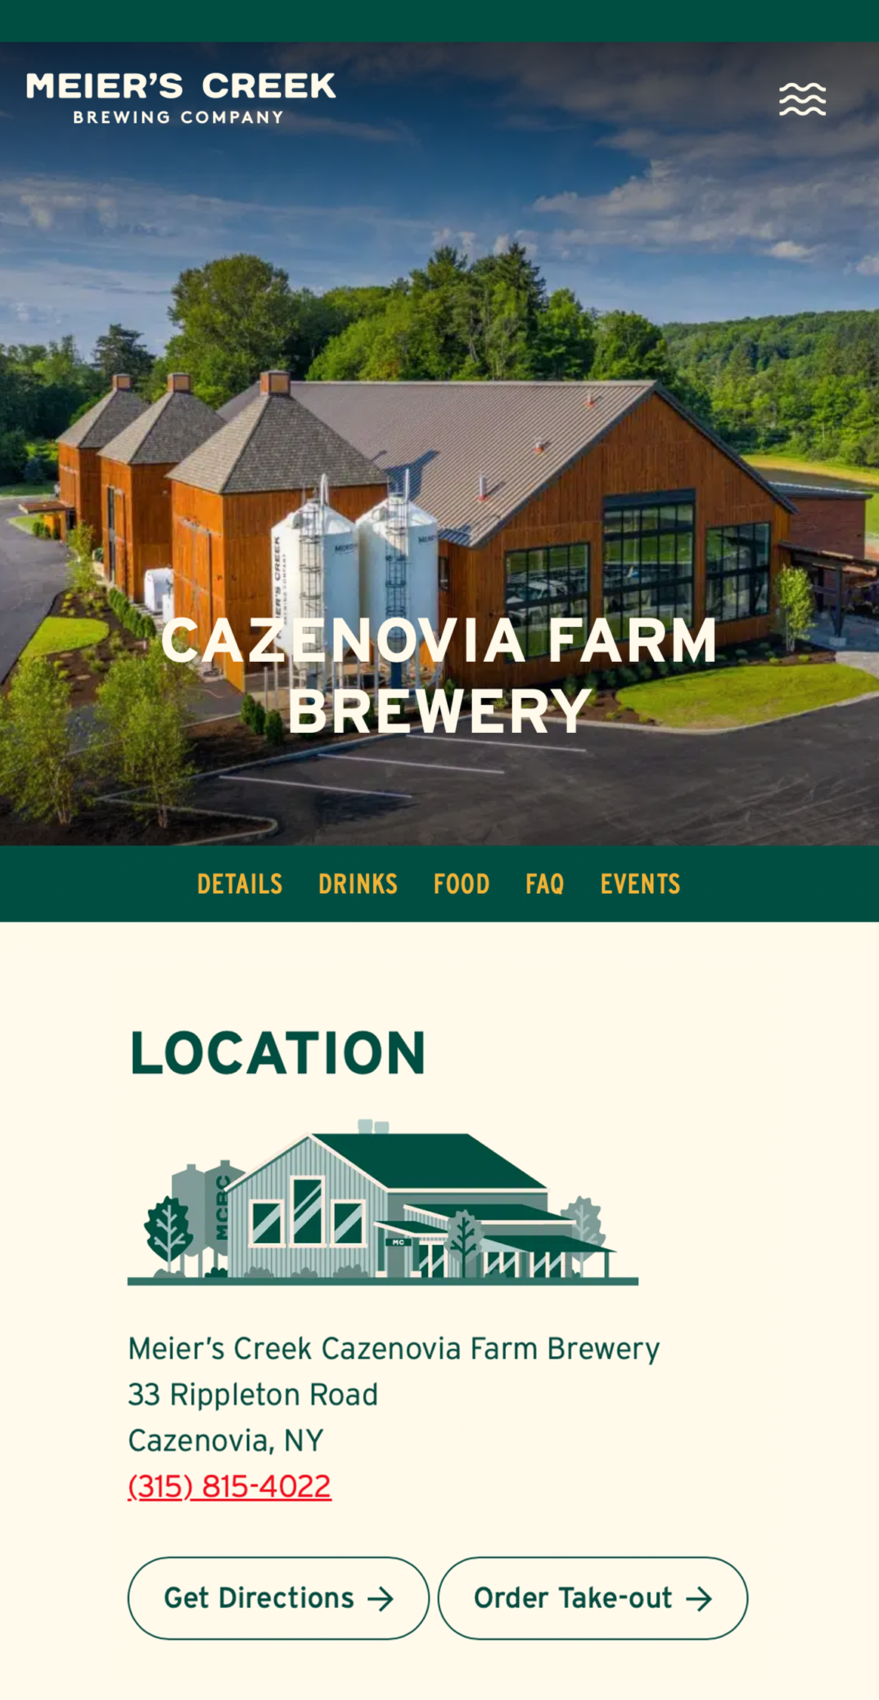 The Meier's Creek Brewing Company's Cazenovia farm brewery location page with a custom illustration depicting the brew pub exterior